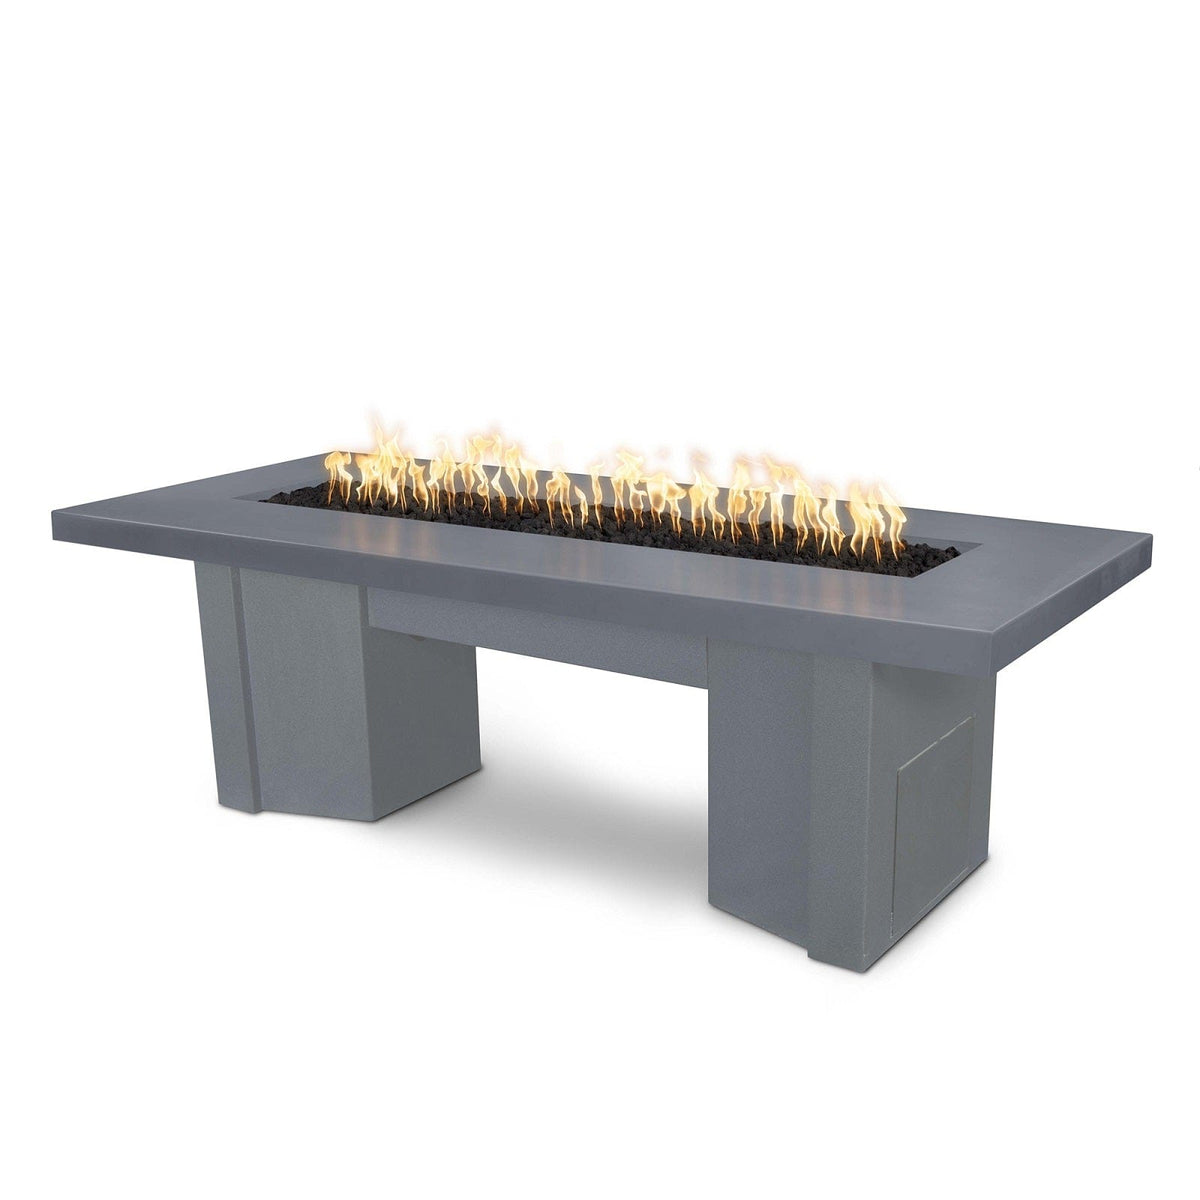 The Outdoor Plus Fire Features Gray (-GRY) / Gray Powder Coated Steel (-GRY) The Outdoor Plus 60&quot; Alameda Fire Table Smooth Concrete in Liquid Propane - Match Lit / OPT-ALMGFRC60-LP